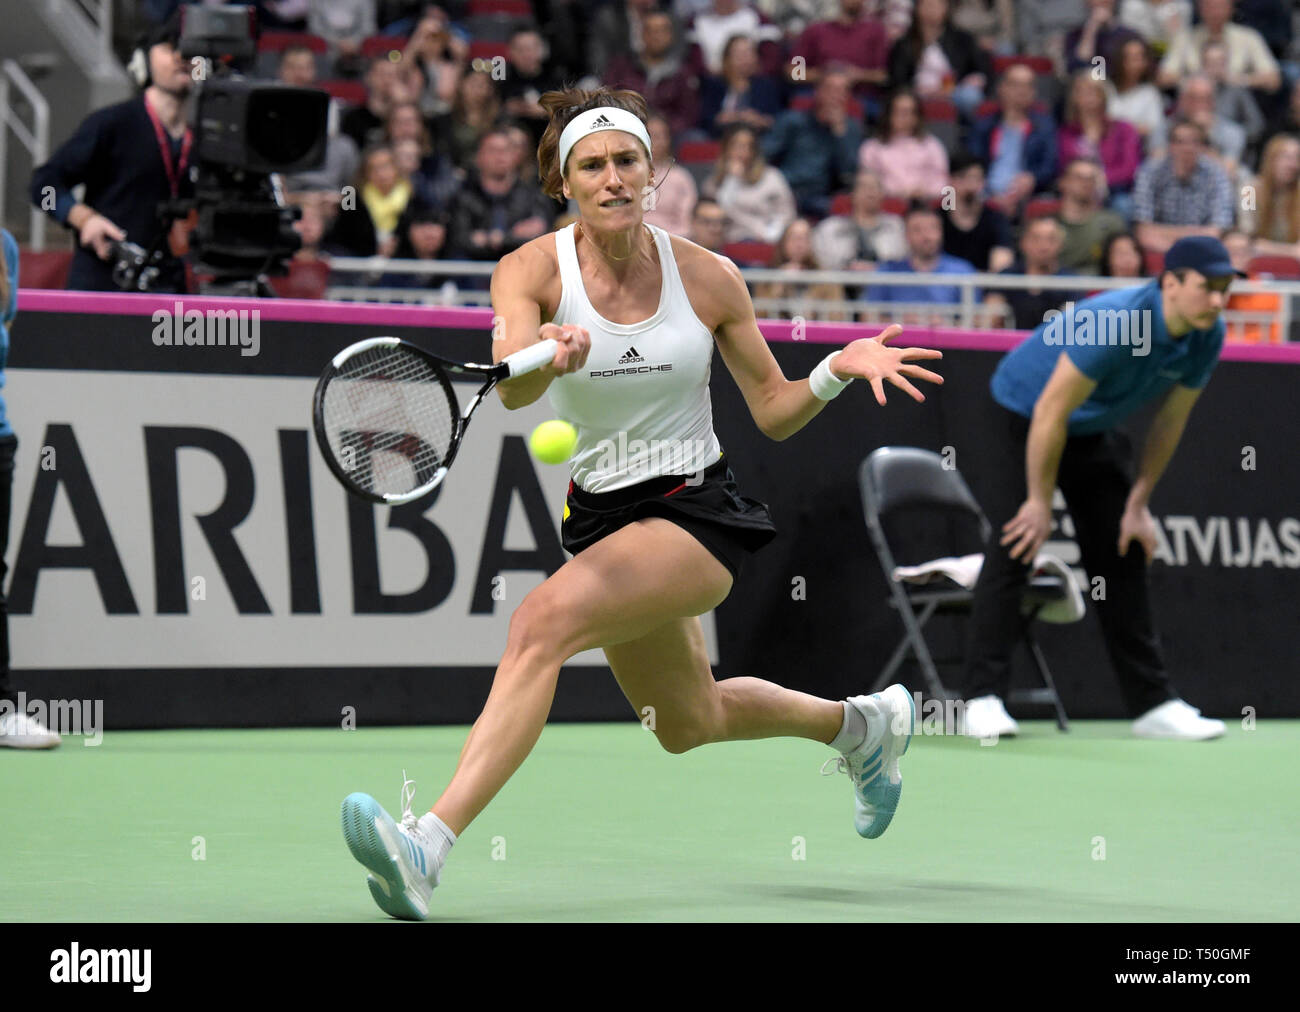 Riga. 19th Apr, 2019. Andrea Petkovic of Germany returns a shot to Jelena Ostapenko of Latvia during the 2019 Fed Cup World Group Play-offs between Latvia and Germany in Riga, Latvia on April 19, 2019. Credit: Edijs Palens/Xinhua/Alamy Live News Stock Photo